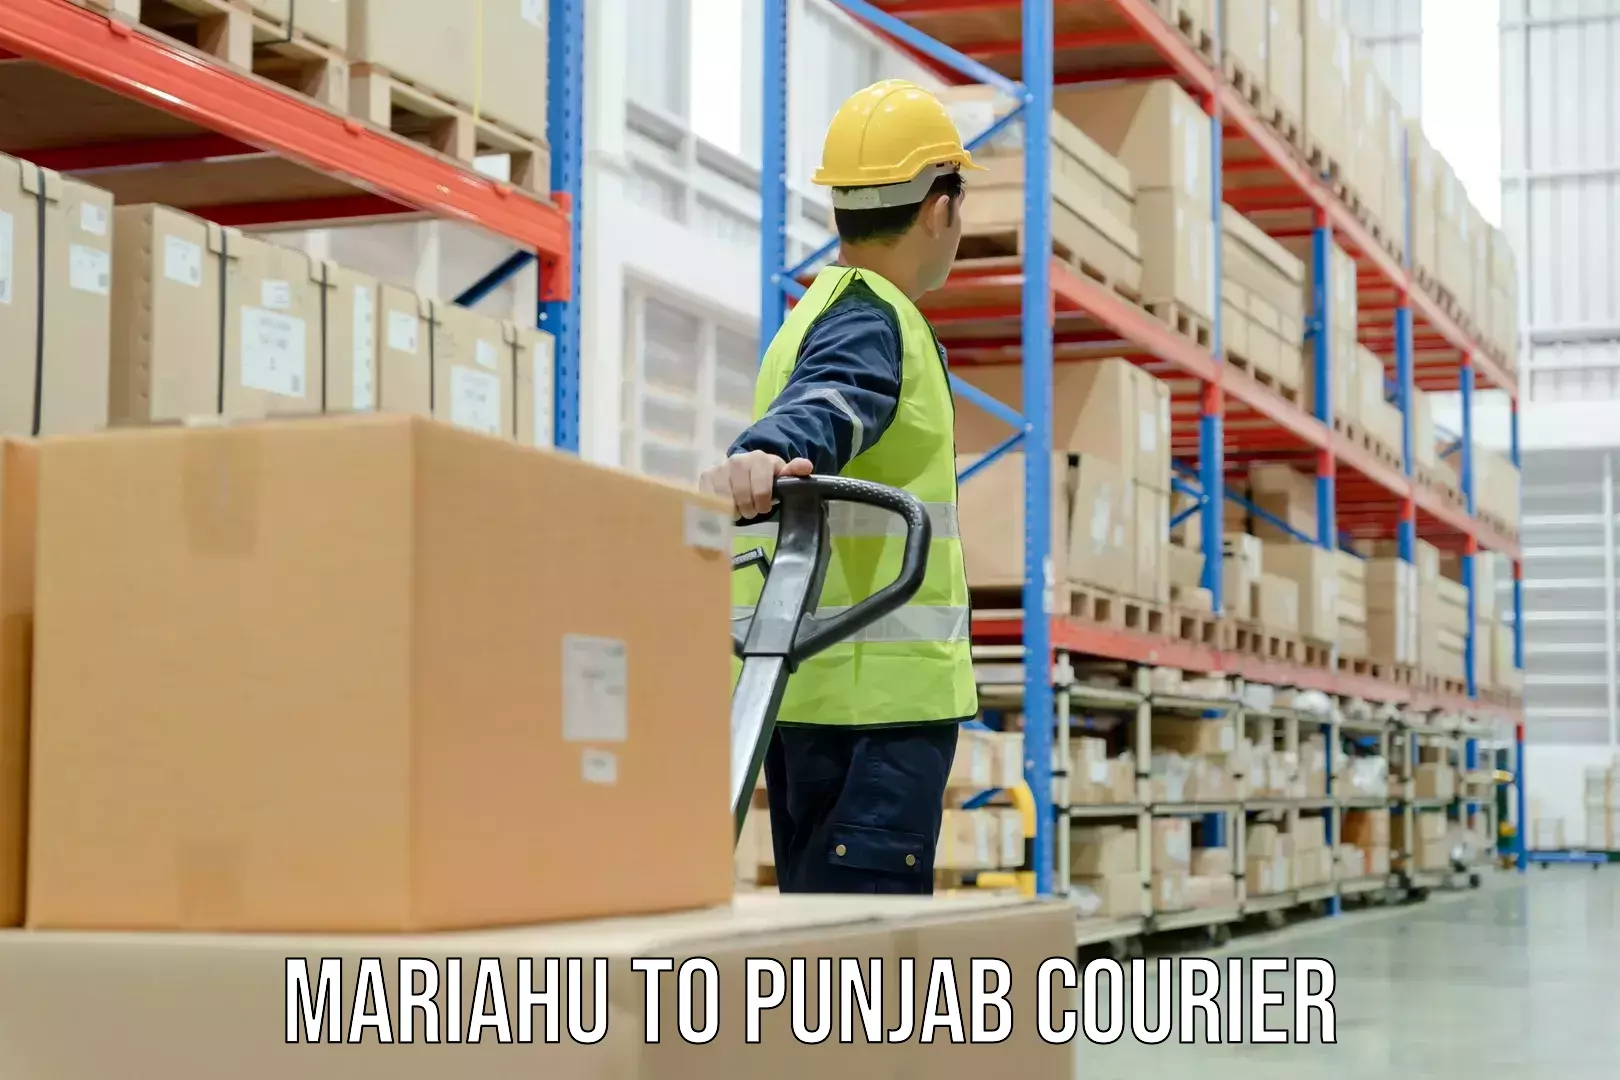 Global courier networks Mariahu to Punjab